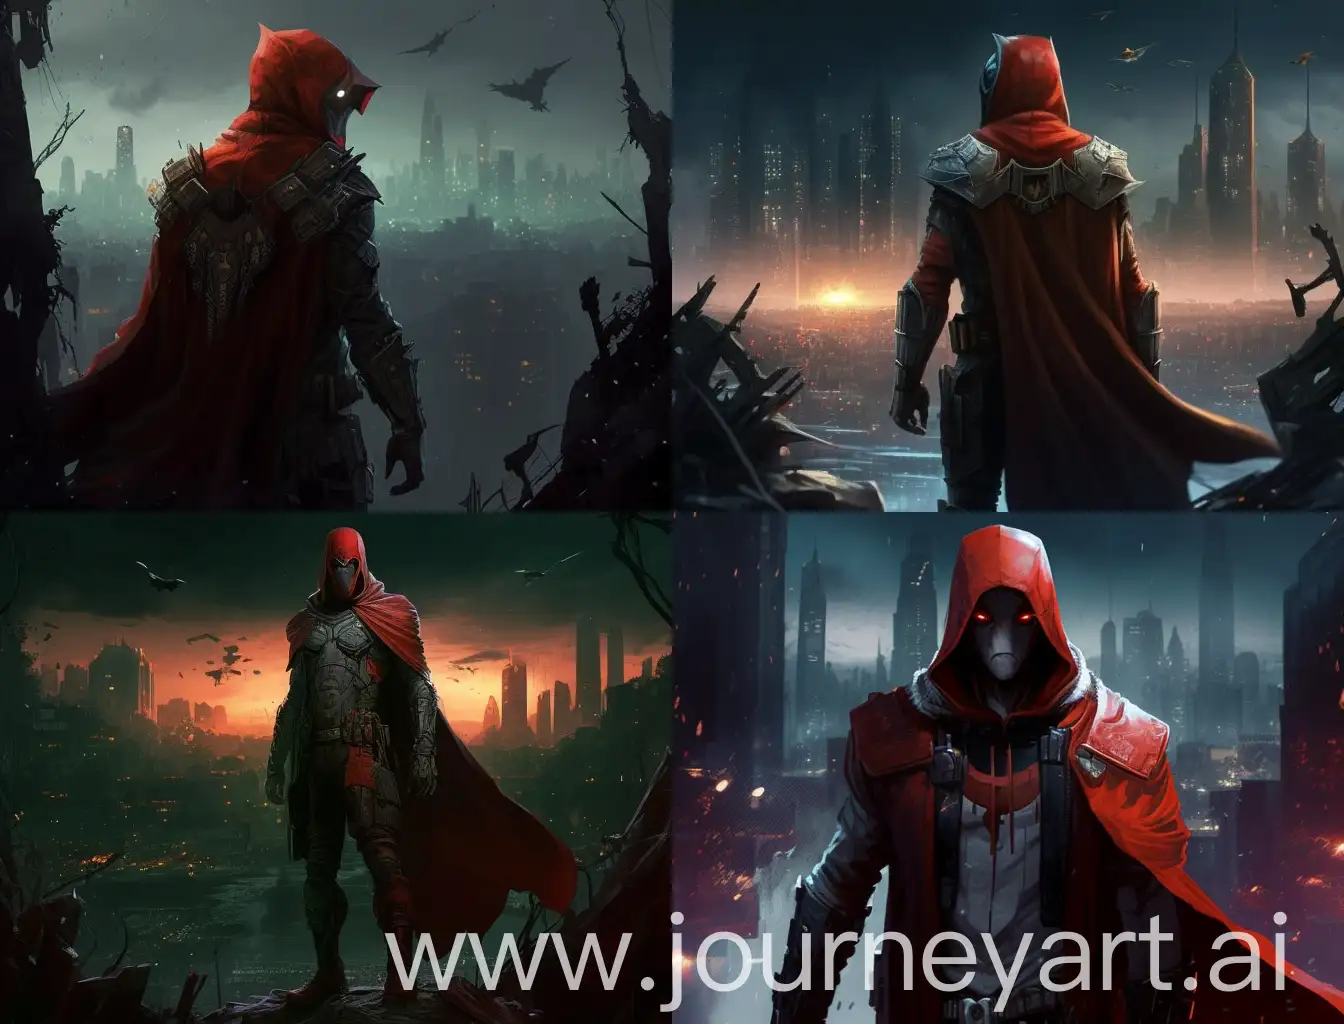 Red-Hood-Stands-Amidst-Ruined-Cities-in-Dark-Real-Environment